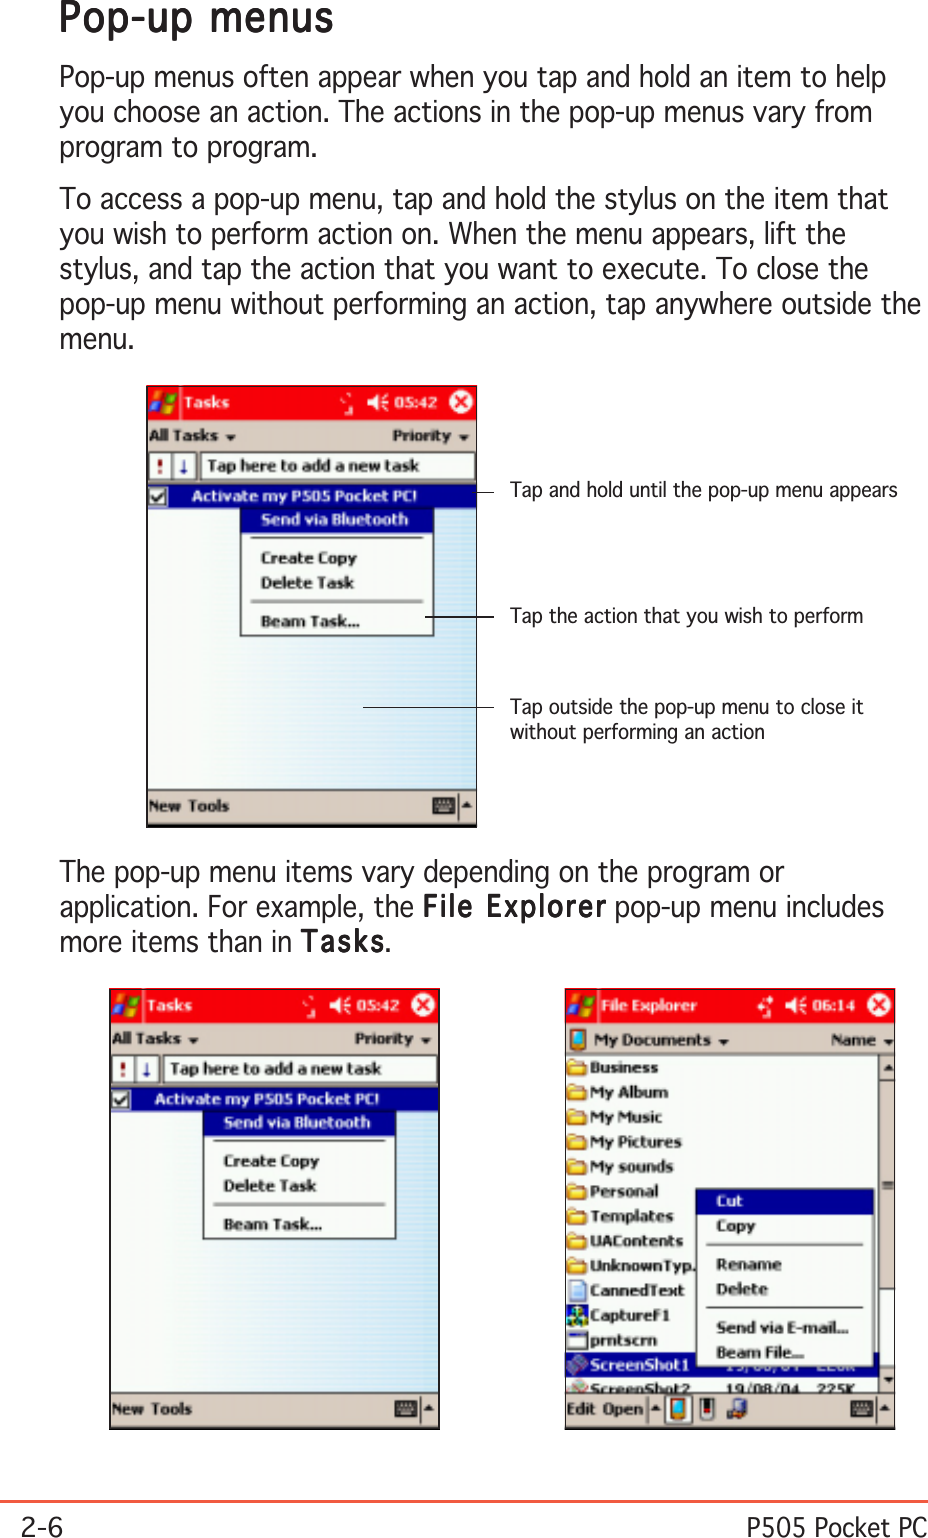 2-6P505 Pocket PCThe pop-up menu items vary depending on the program orapplication. For example, the File ExplorerFile ExplorerFile ExplorerFile ExplorerFile Explorer pop-up menu includesmore items than in TasksTasksTasksTasksTasks.Pop-up menusPop-up menusPop-up menusPop-up menusPop-up menusPop-up menus often appear when you tap and hold an item to helpyou choose an action. The actions in the pop-up menus vary fromprogram to program.To access a pop-up menu, tap and hold the stylus on the item thatyou wish to perform action on. When the menu appears, lift thestylus, and tap the action that you want to execute. To close thepop-up menu without performing an action, tap anywhere outside themenu.Tap and hold until the pop-up menu appearsTap the action that you wish to performTap outside the pop-up menu to close itwithout performing an action